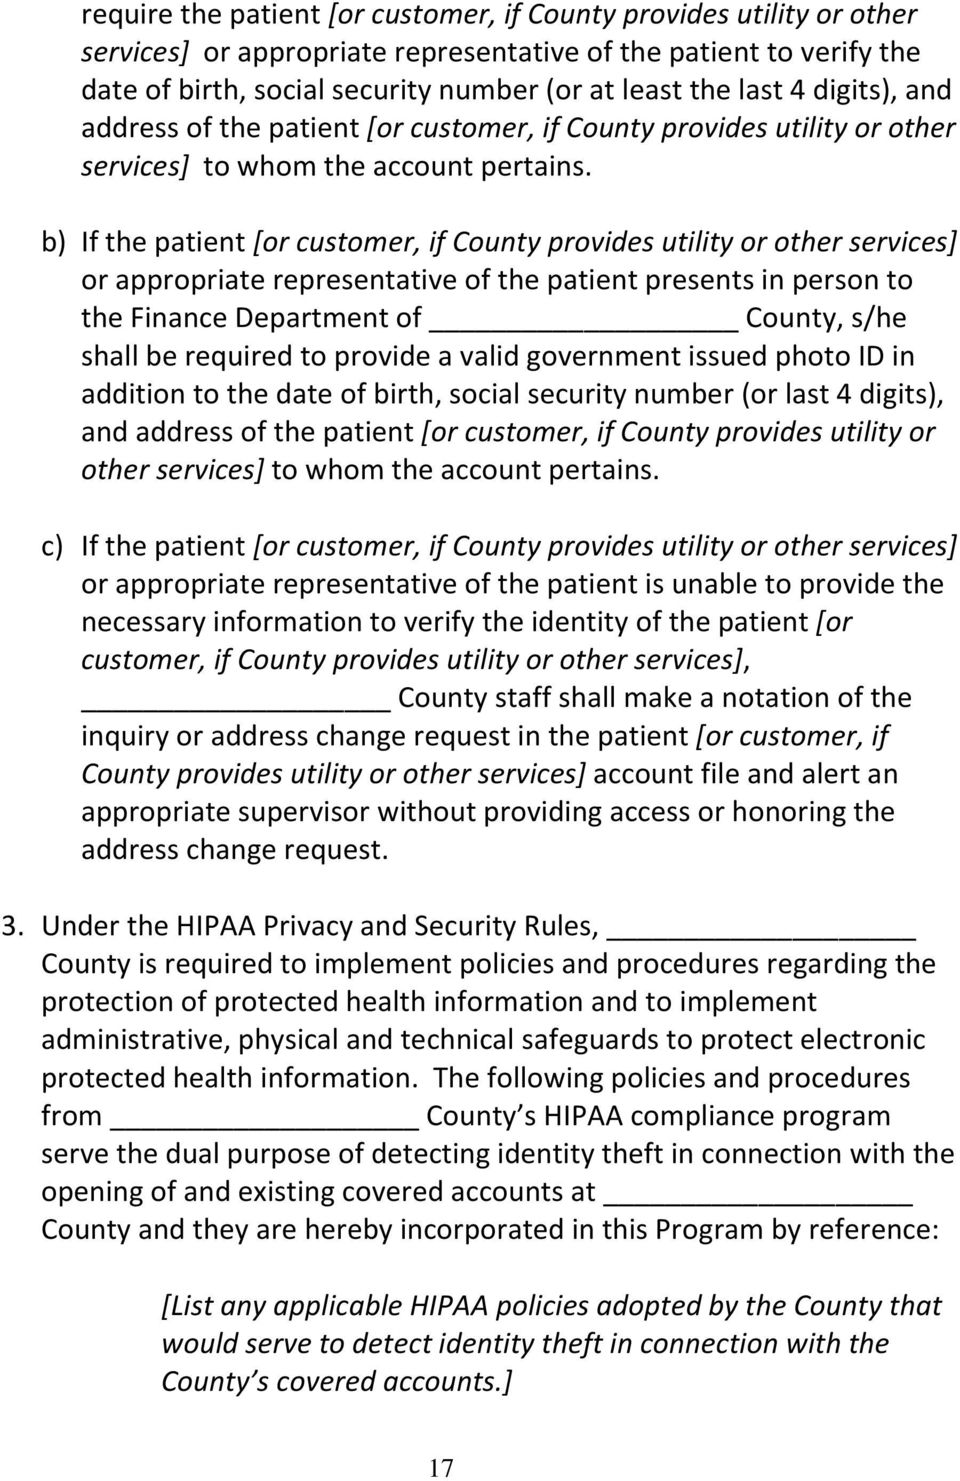 b) If the patient [or customer, if County provides utility or other services] or appropriate representative of the patient presents in person to the Finance Department of County, s/he shall be